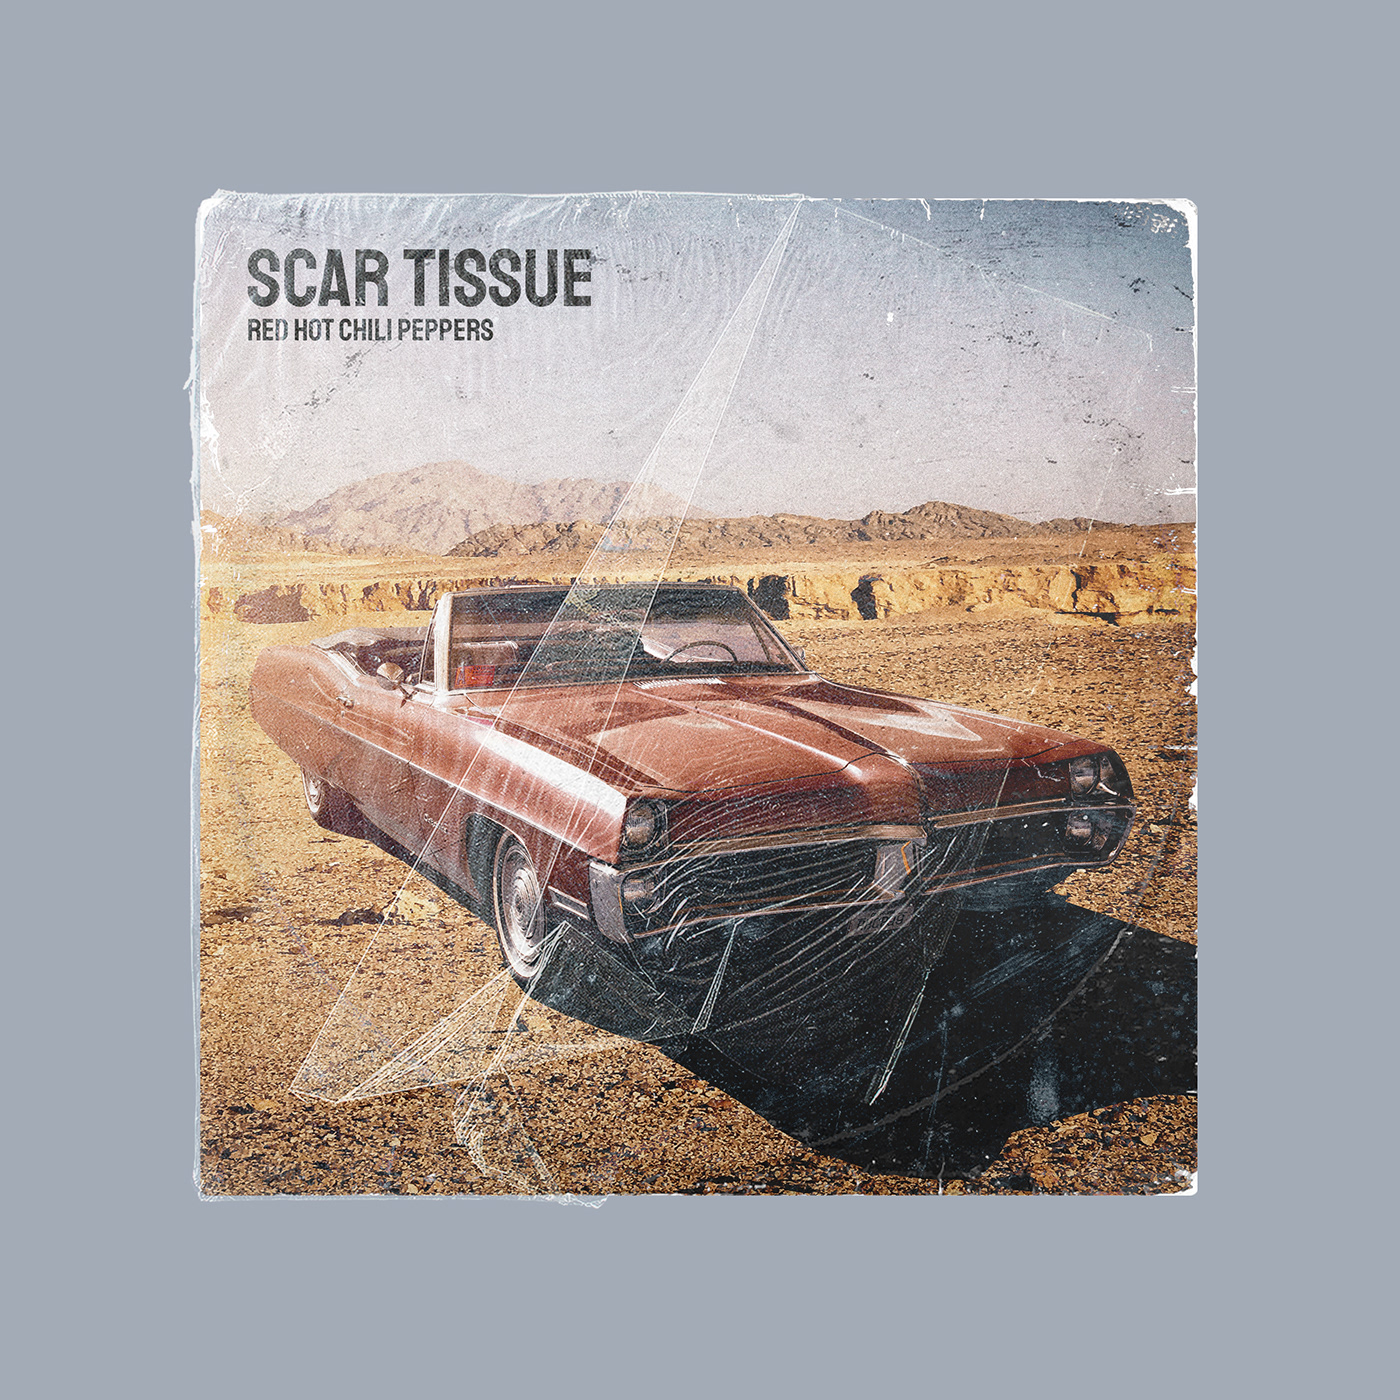 californication cover coverart coverdesign design music record Red Hot Chili Peppers scar tissue Single